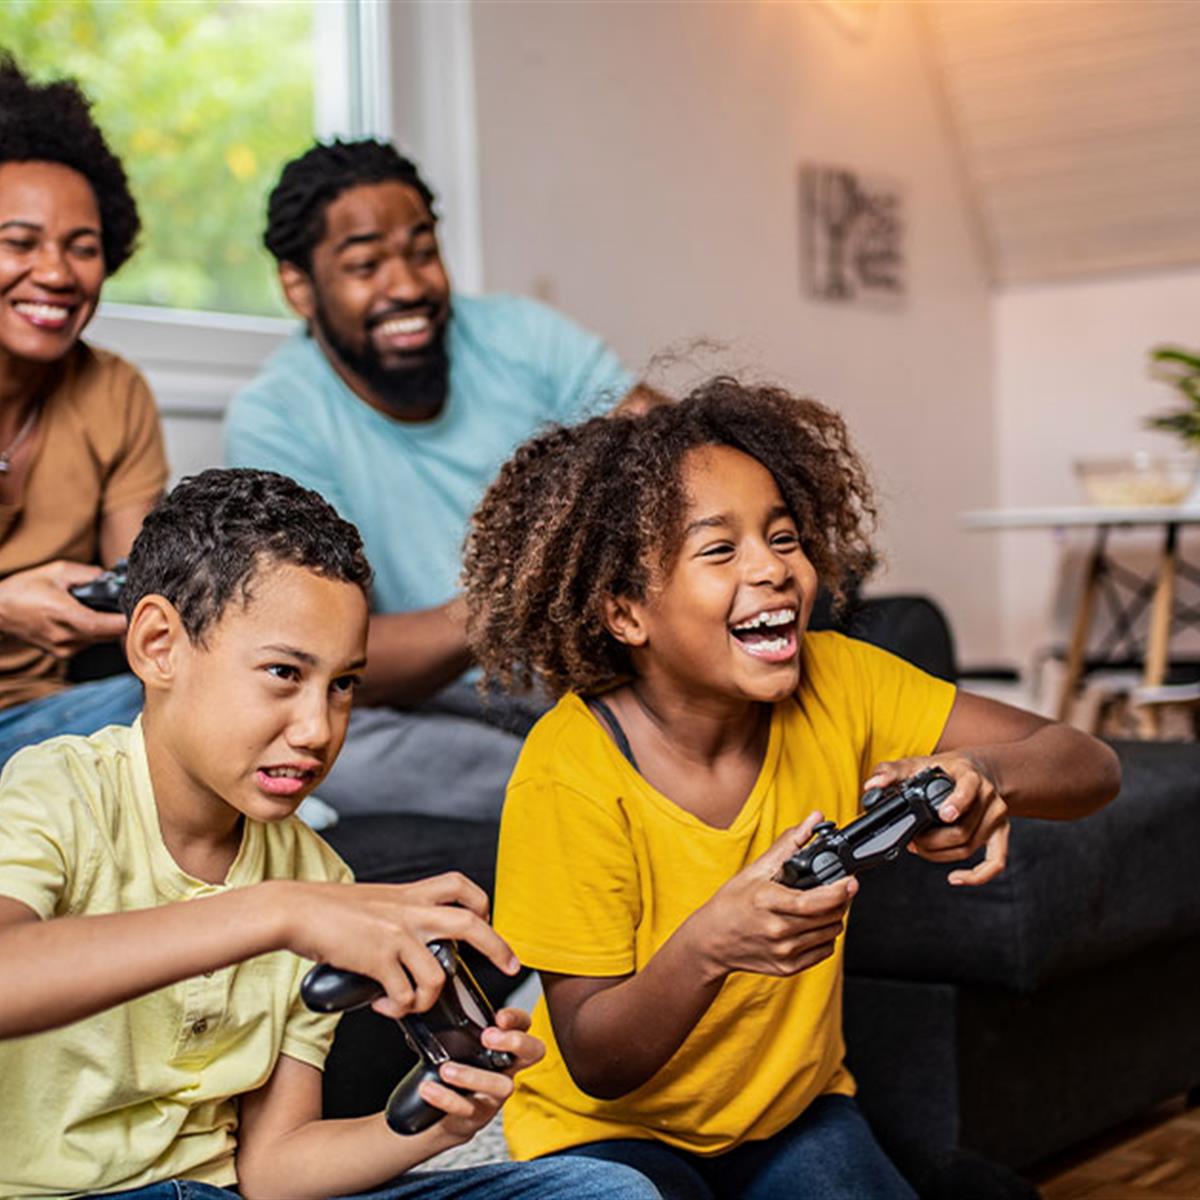 Healthy video gaming for children & teens